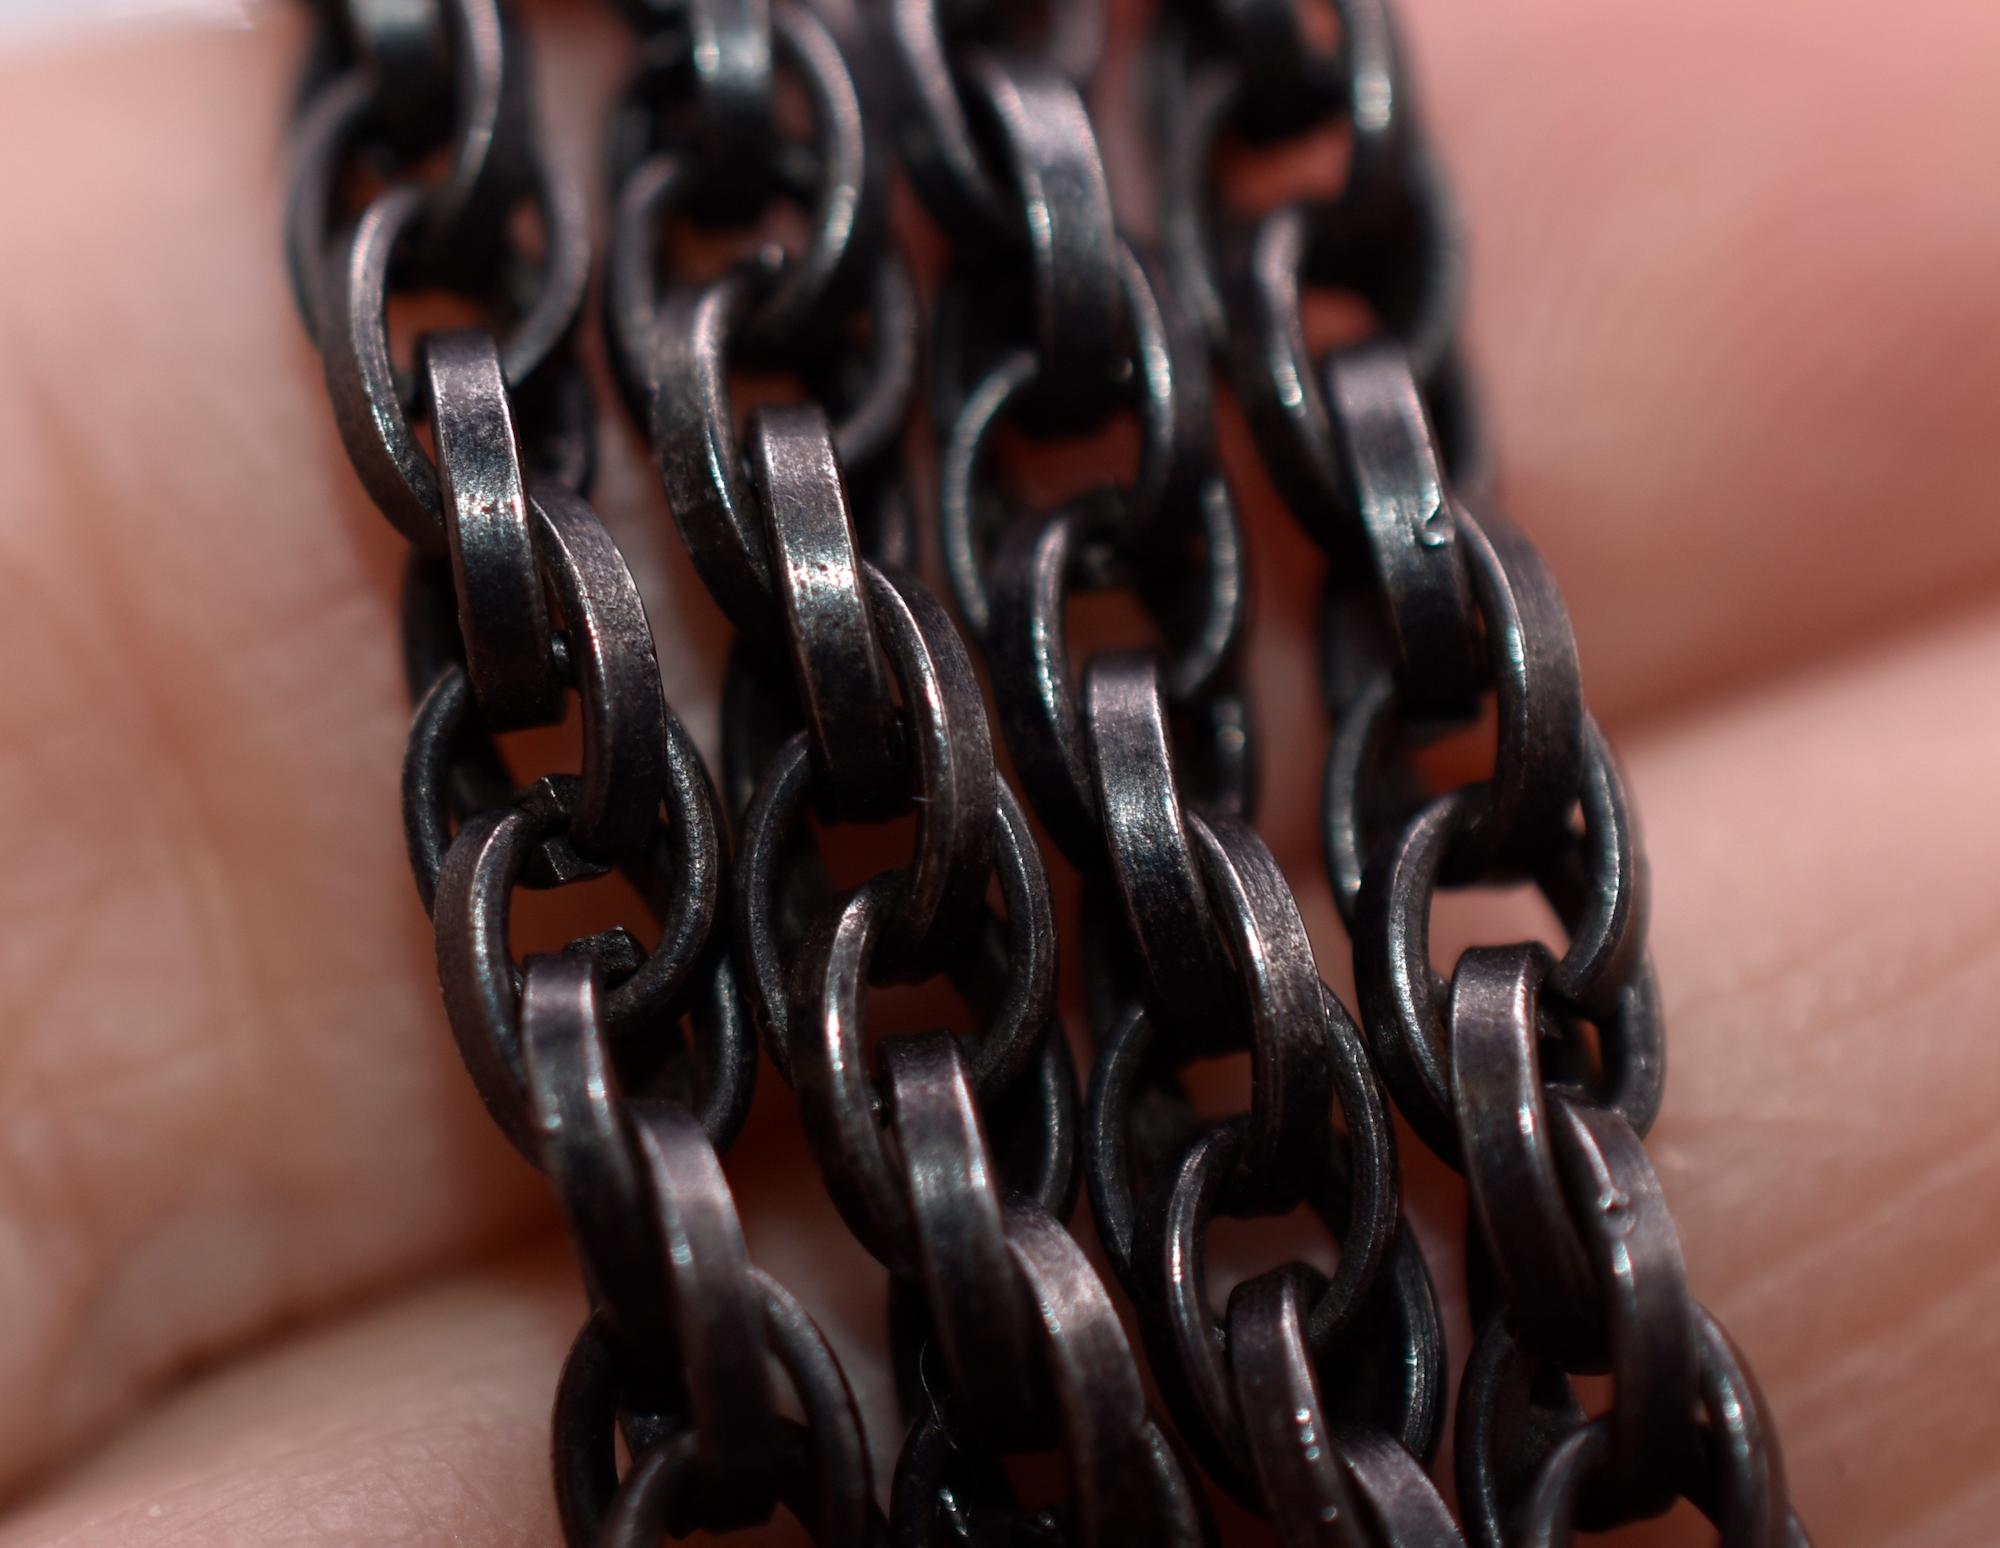 Unusual lightweight original watch chain of gunmetal, a material used to make decorative chains, purses, brooches, buckles and other items during the Victorian era. Gunmetal is an alloy of copper and tin. The chain has interwoven horizontal knot